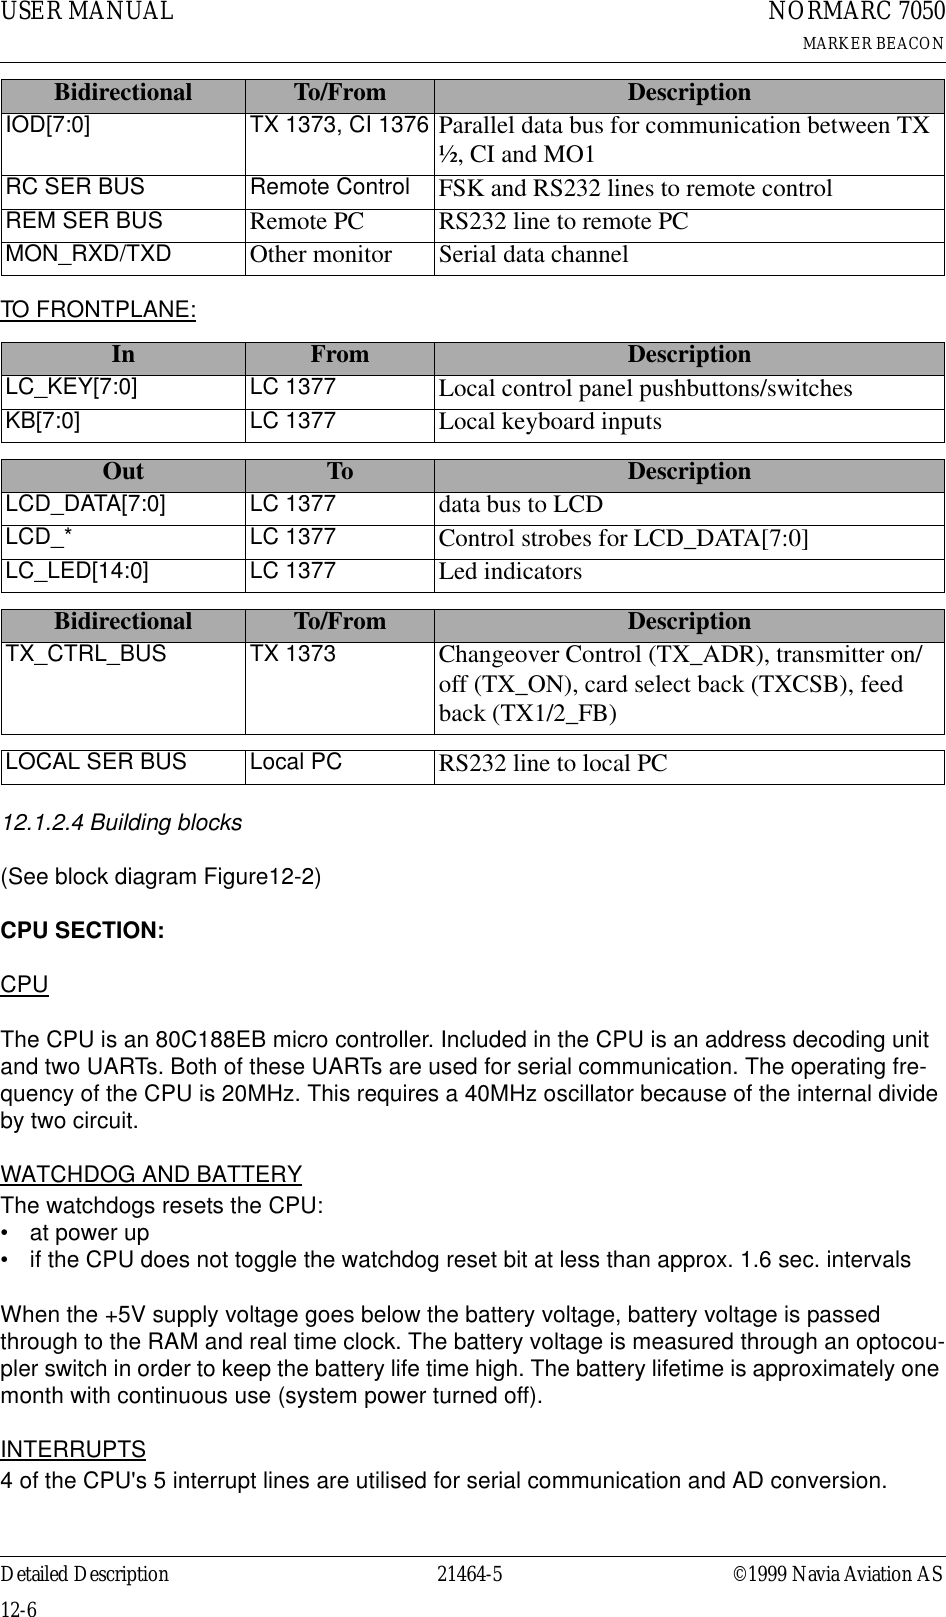 USER MANUAL12-621464-5NORMARC 7050MARKER BEACONDetailed Description ©1999 Navia Aviation ASTO FRONTPLANE:12.1.2.4 Building blocks(See block diagram Figure12-2)CPU SECTION:CPUThe CPU is an 80C188EB micro controller. Included in the CPU is an address decoding unit and two UARTs. Both of these UARTs are used for serial communication. The operating fre-quency of the CPU is 20MHz. This requires a 40MHz oscillator because of the internal divide by two circuit.WATCHDOG AND BATTERYThe watchdogs resets the CPU:• at power up• if the CPU does not toggle the watchdog reset bit at less than approx. 1.6 sec. intervals When the +5V supply voltage goes below the battery voltage, battery voltage is passed through to the RAM and real time clock. The battery voltage is measured through an optocou-pler switch in order to keep the battery life time high. The battery lifetime is approximately one month with continuous use (system power turned off).INTERRUPTS4 of the CPU&apos;s 5 interrupt lines are utilised for serial communication and AD conversion.Bidirectional To/From DescriptionIOD[7:0] TX 1373, CI 1376 Parallel data bus for communication between TX ½, CI and MO1RC SER BUS Remote Control FSK and RS232 lines to remote controlREM SER BUS Remote PC RS232 line to remote PCMON_RXD/TXD Other monitor Serial data channelIn From DescriptionLC_KEY[7:0] LC 1377 Local control panel pushbuttons/switchesKB[7:0] LC 1377 Local keyboard inputsOut To DescriptionLCD_DATA[7:0] LC 1377 data bus to LCD LCD_* LC 1377 Control strobes for LCD_DATA[7:0]LC_LED[14:0] LC 1377 Led indicatorsBidirectional To/From DescriptionTX_CTRL_BUS TX 1373 Changeover Control (TX_ADR), transmitter on/off (TX_ON), card select back (TXCSB), feed back (TX1/2_FB)LOCAL SER BUS Local PC RS232 line to local PC